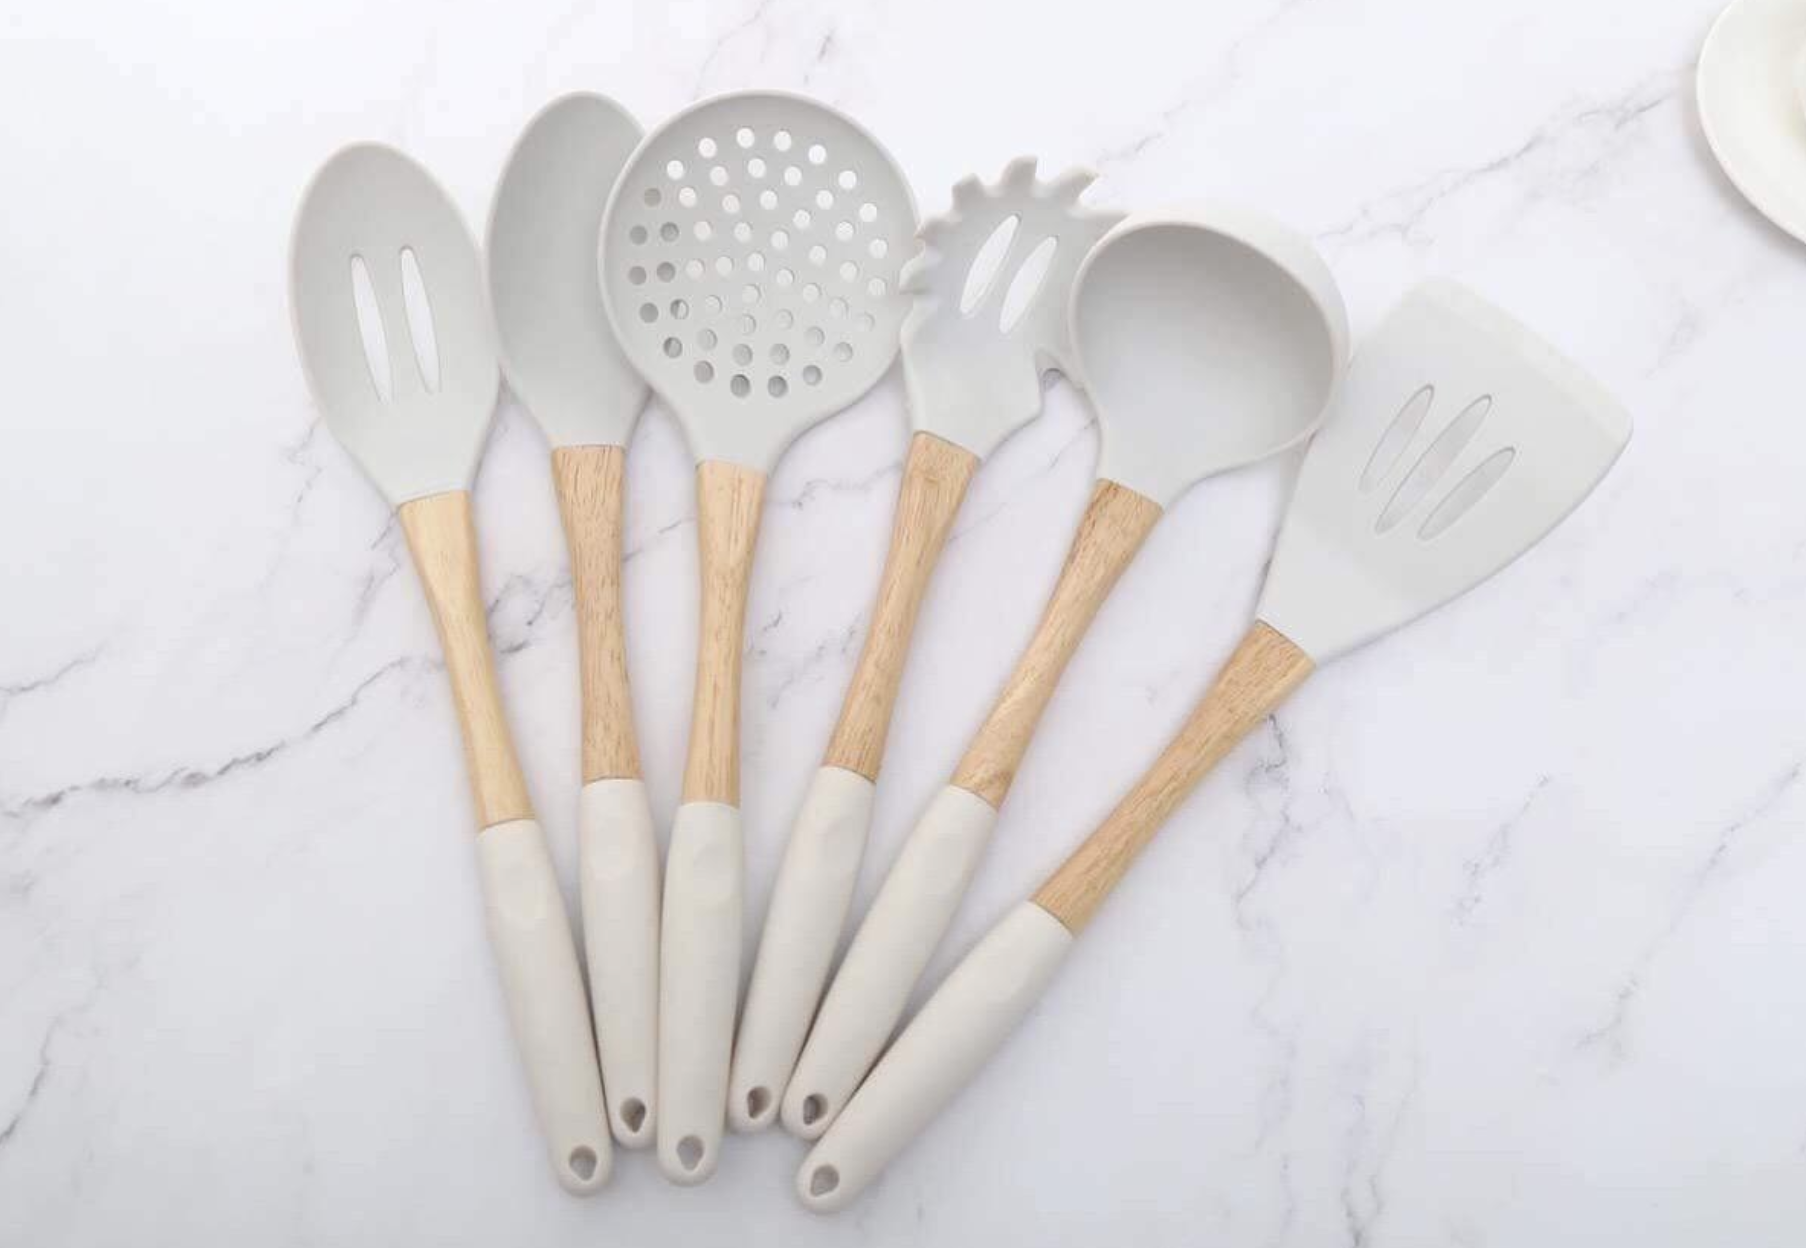 Reviewer image of the silicone utensil set laid out. The handle is a pretty wood with a matching silicone on the ends for cushion.